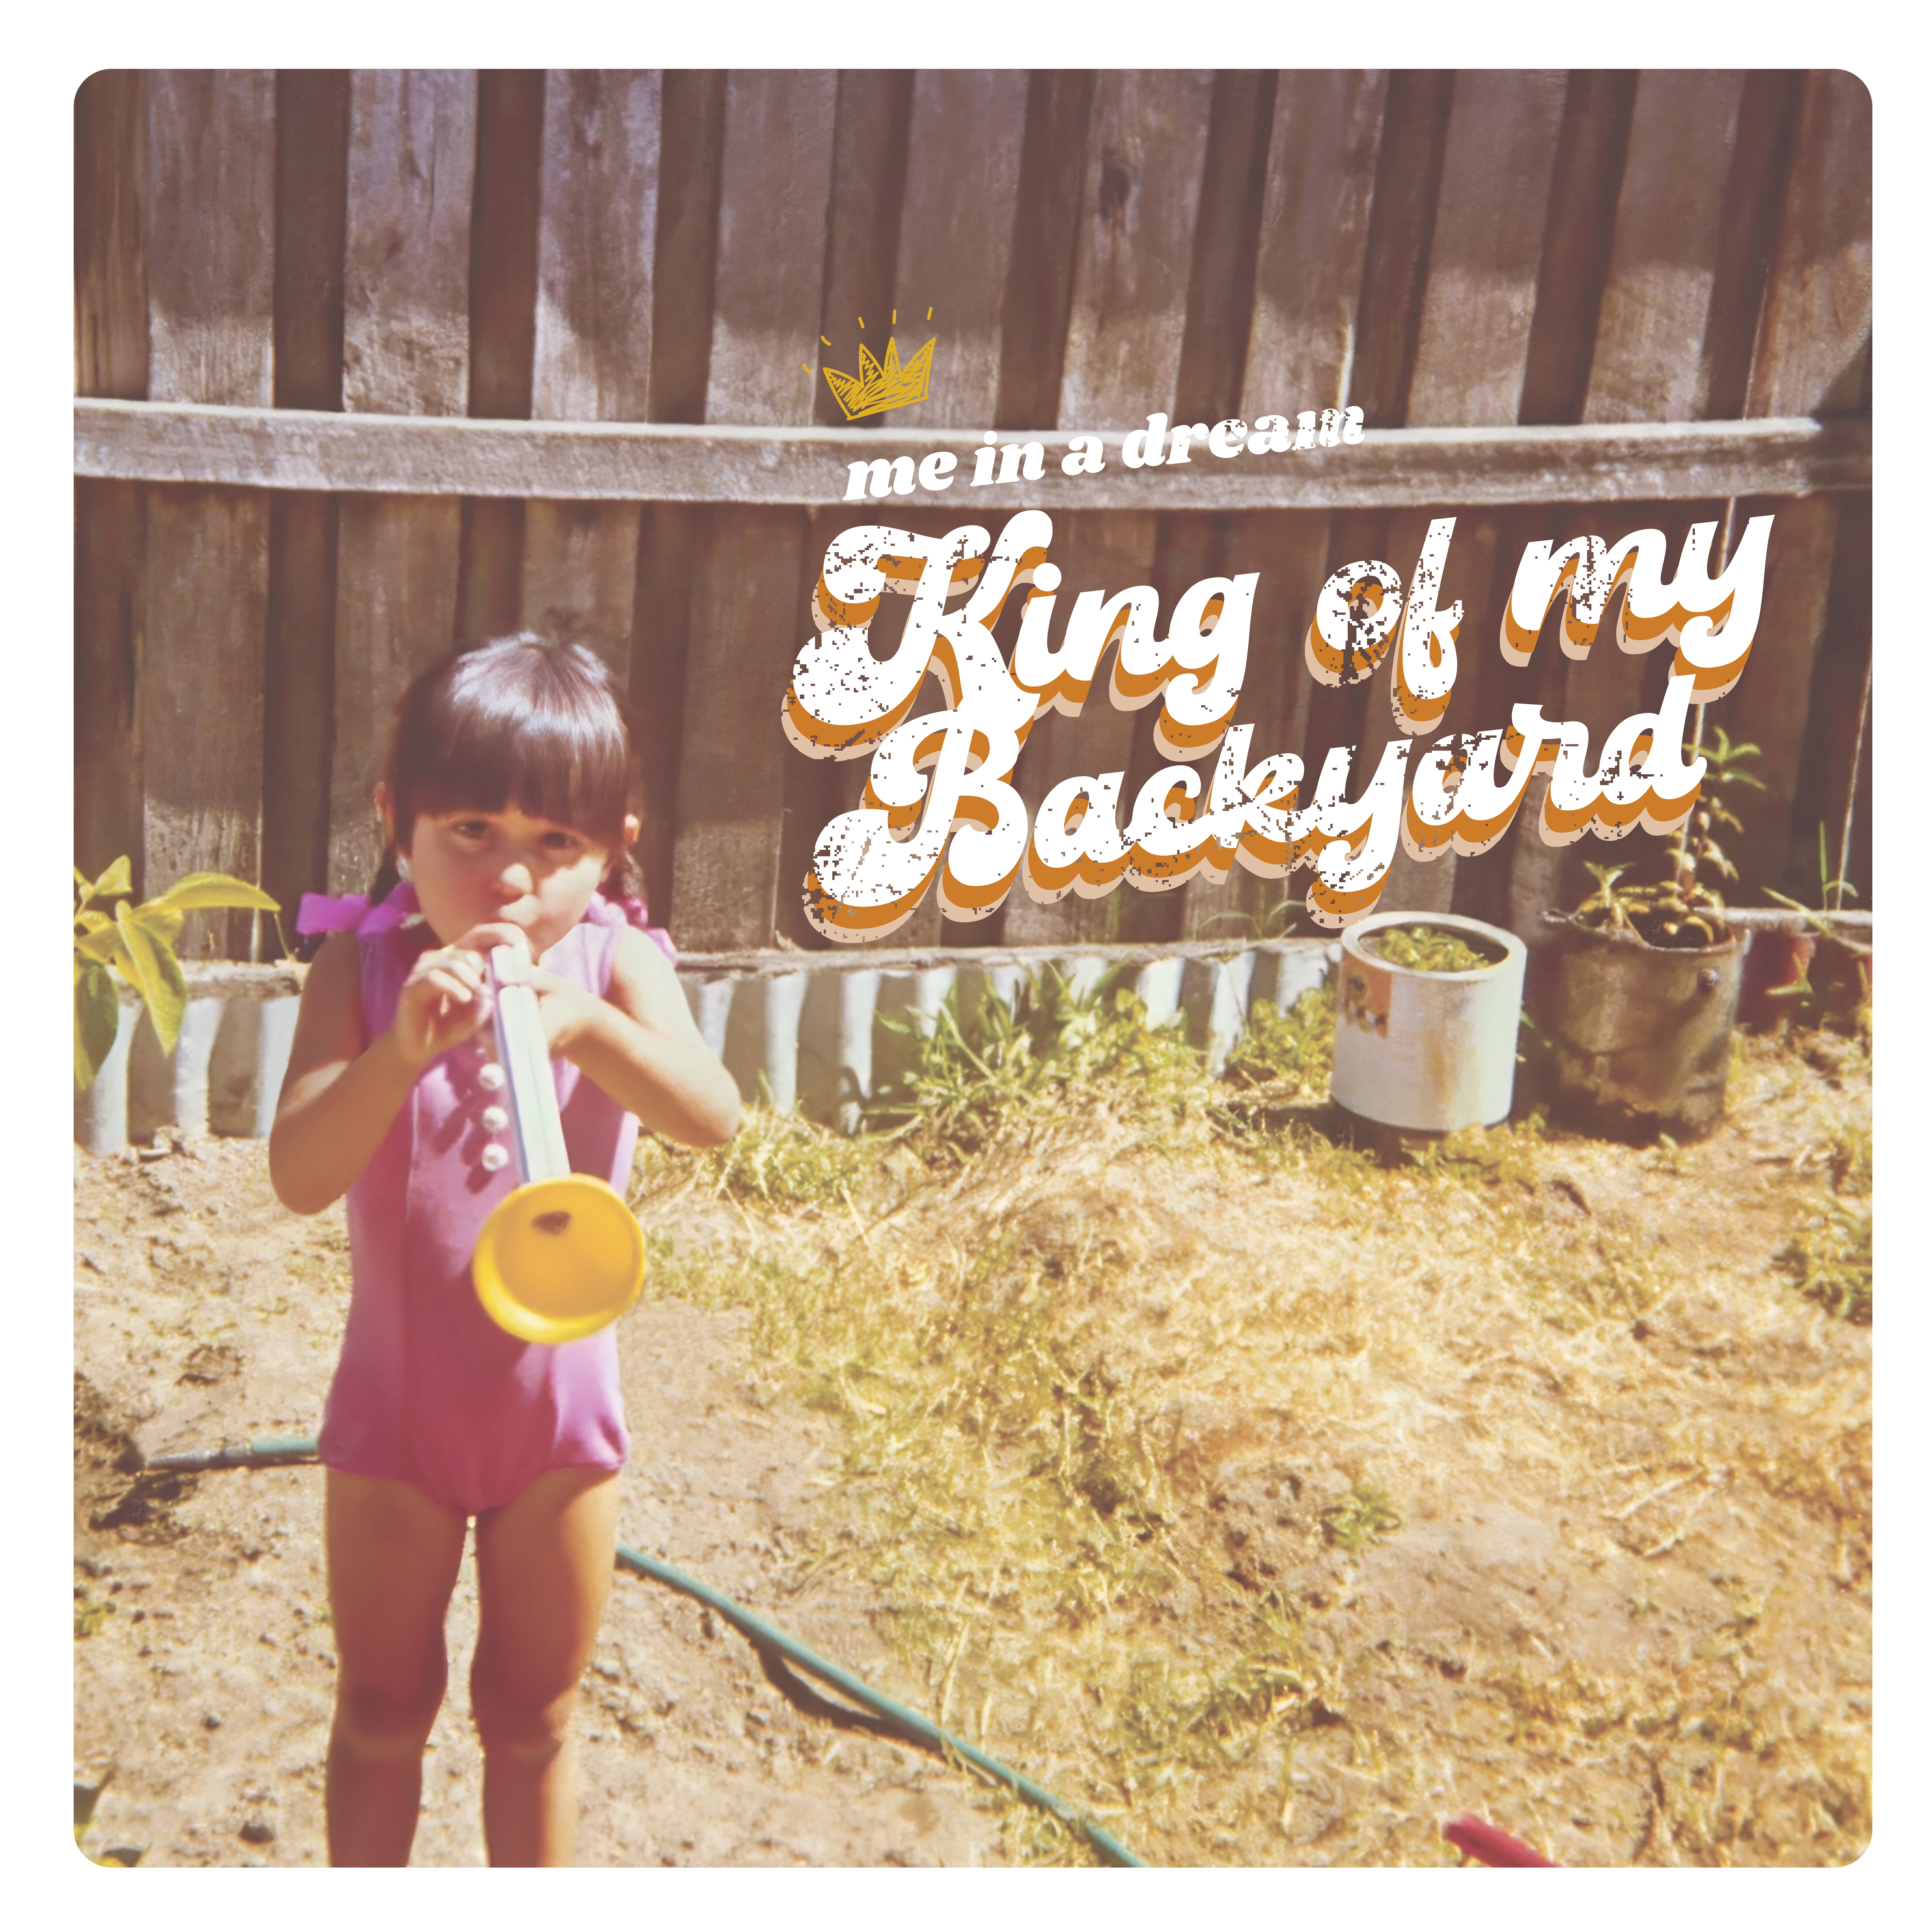 Artwork for track: King of my backyard by Me in a dream